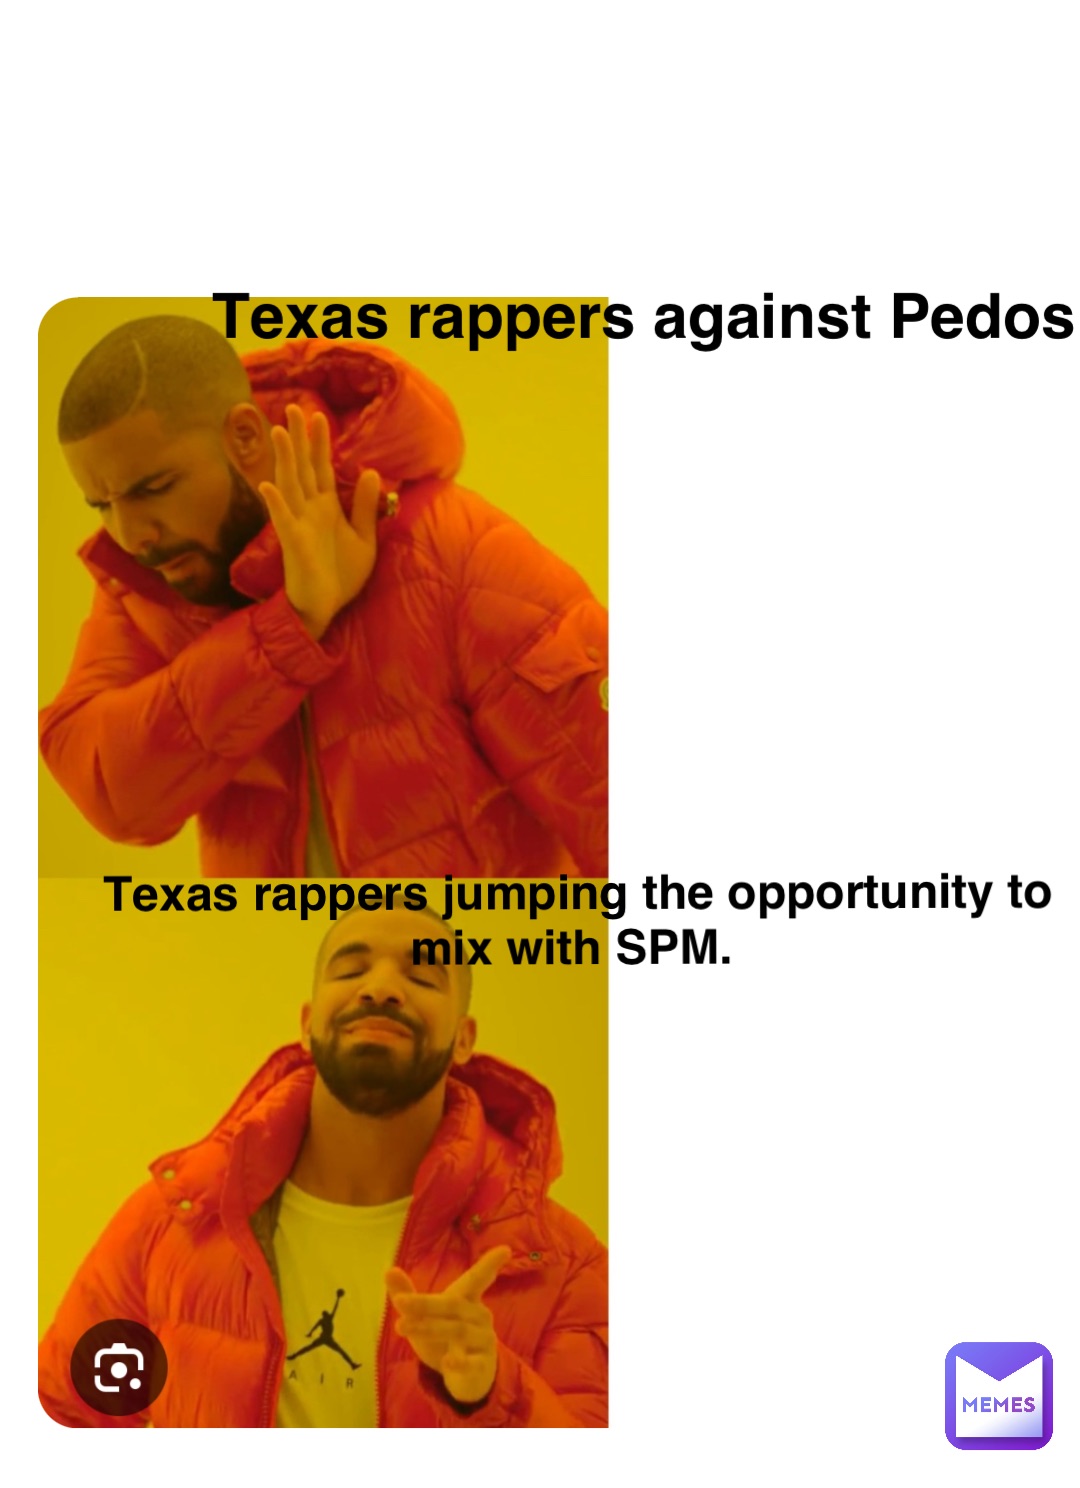 Texas rappers jumping the opportunity to mix with SPM. Texas rappers against Pedos